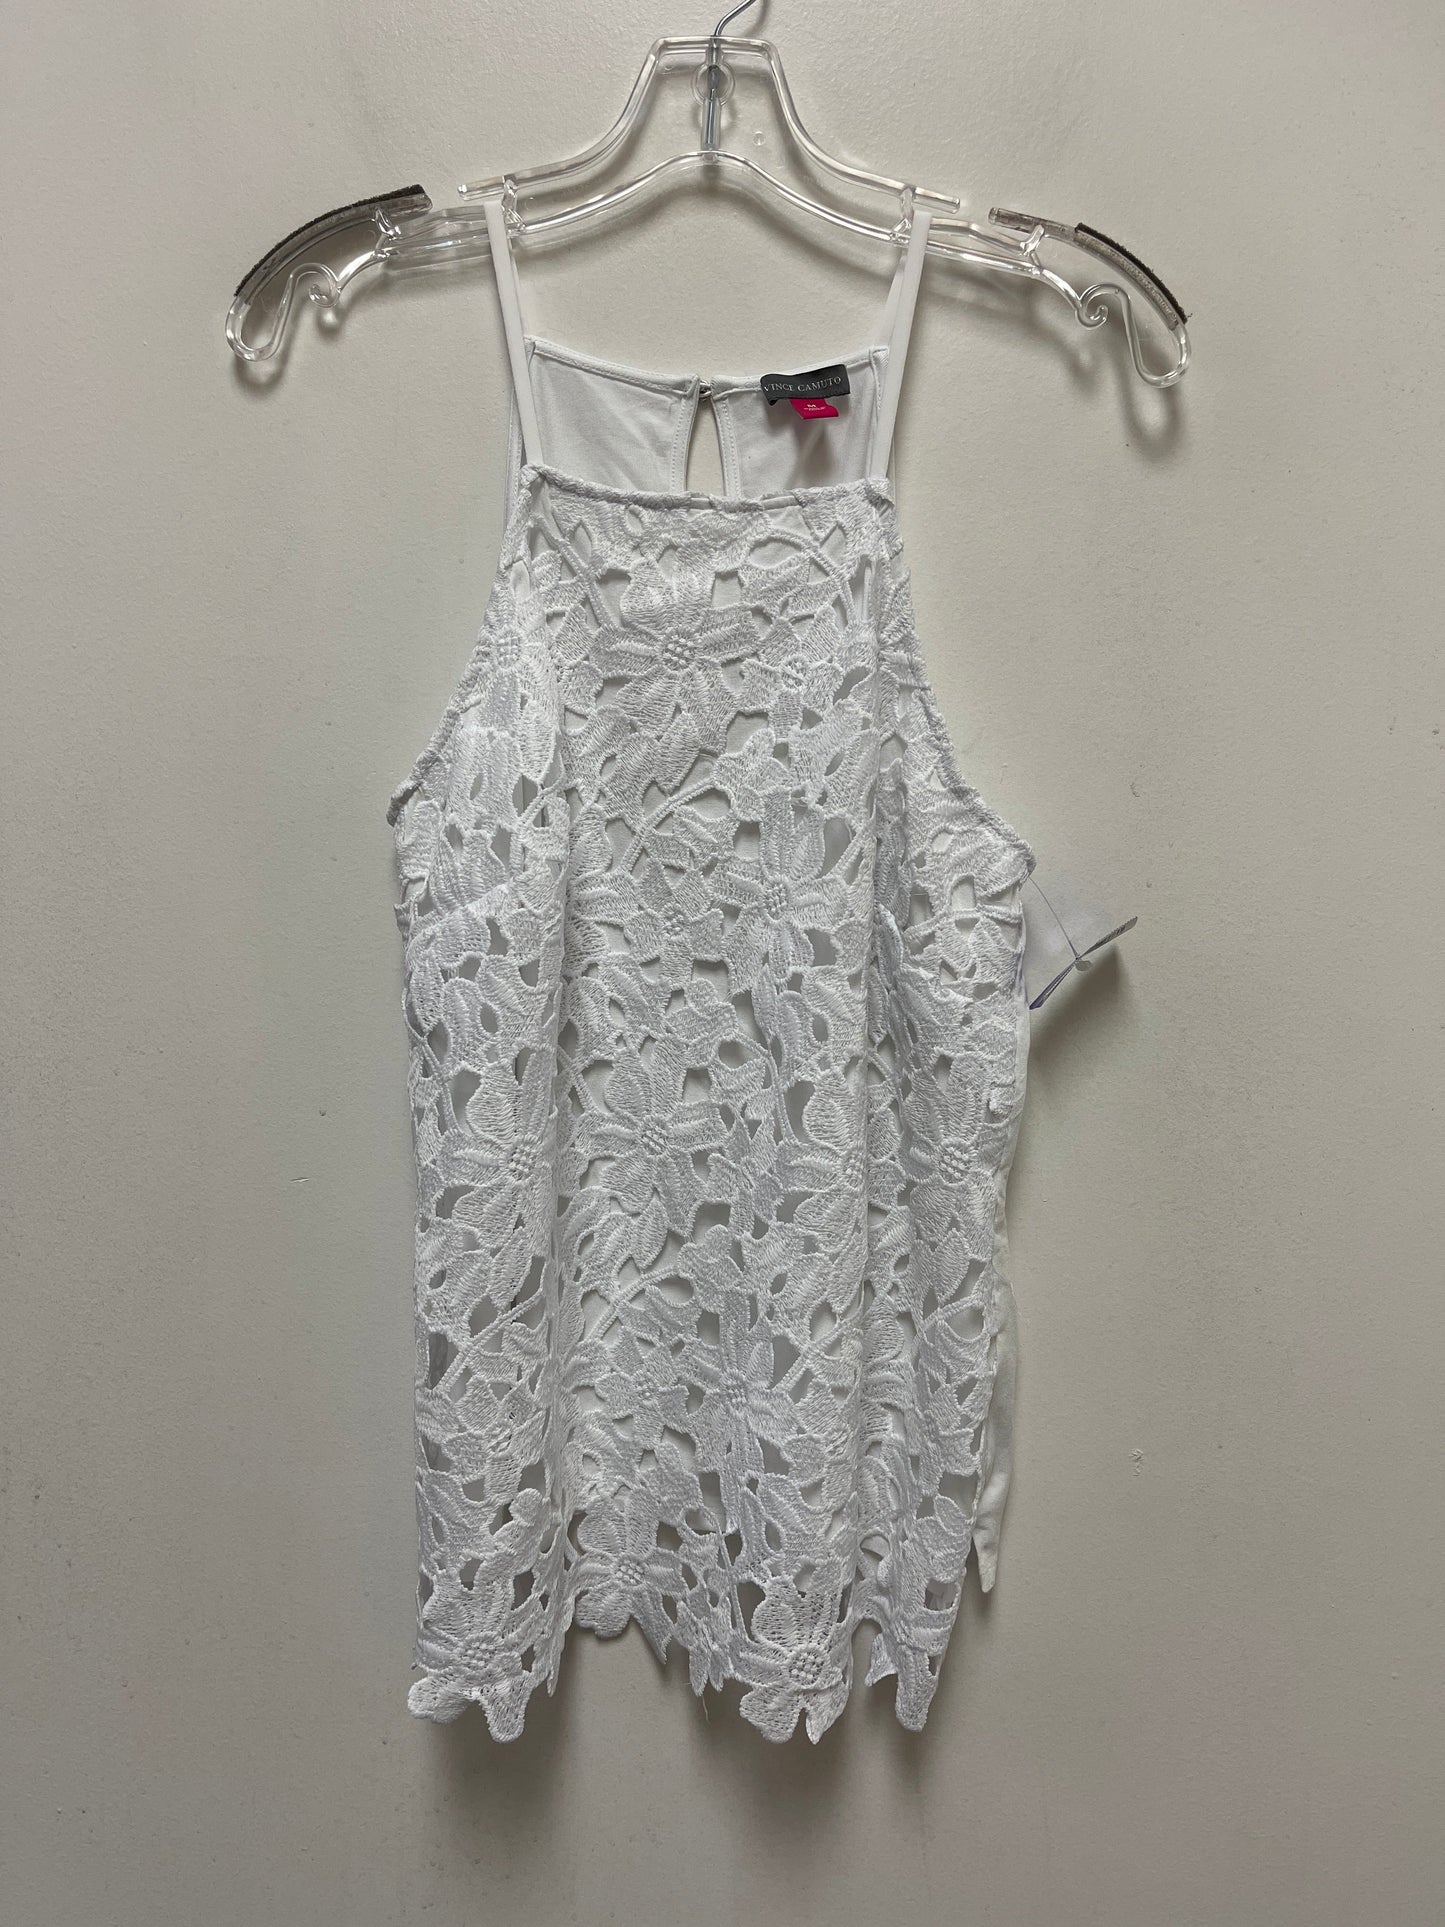 White Top Sleeveless Vince Camuto, Size M